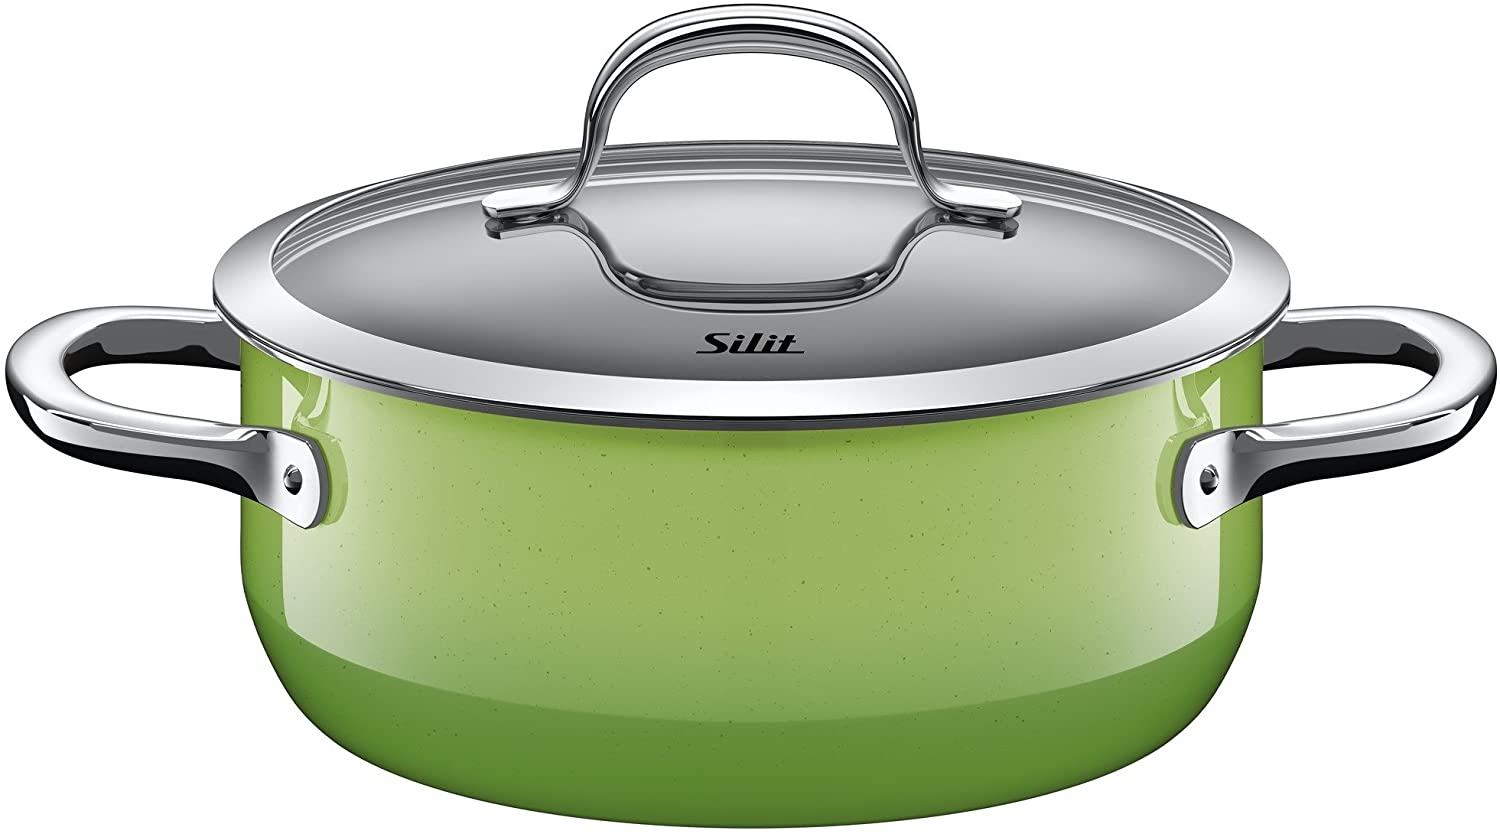 Silit Passion 2101299165 Cooking Pot Pouring Edge Ring Handle Glass Lid Diameter 20 cm 2.4 L Silargan Function Ceramic Suitable for Induction Cookers Dishwasher Safe Green Enamel